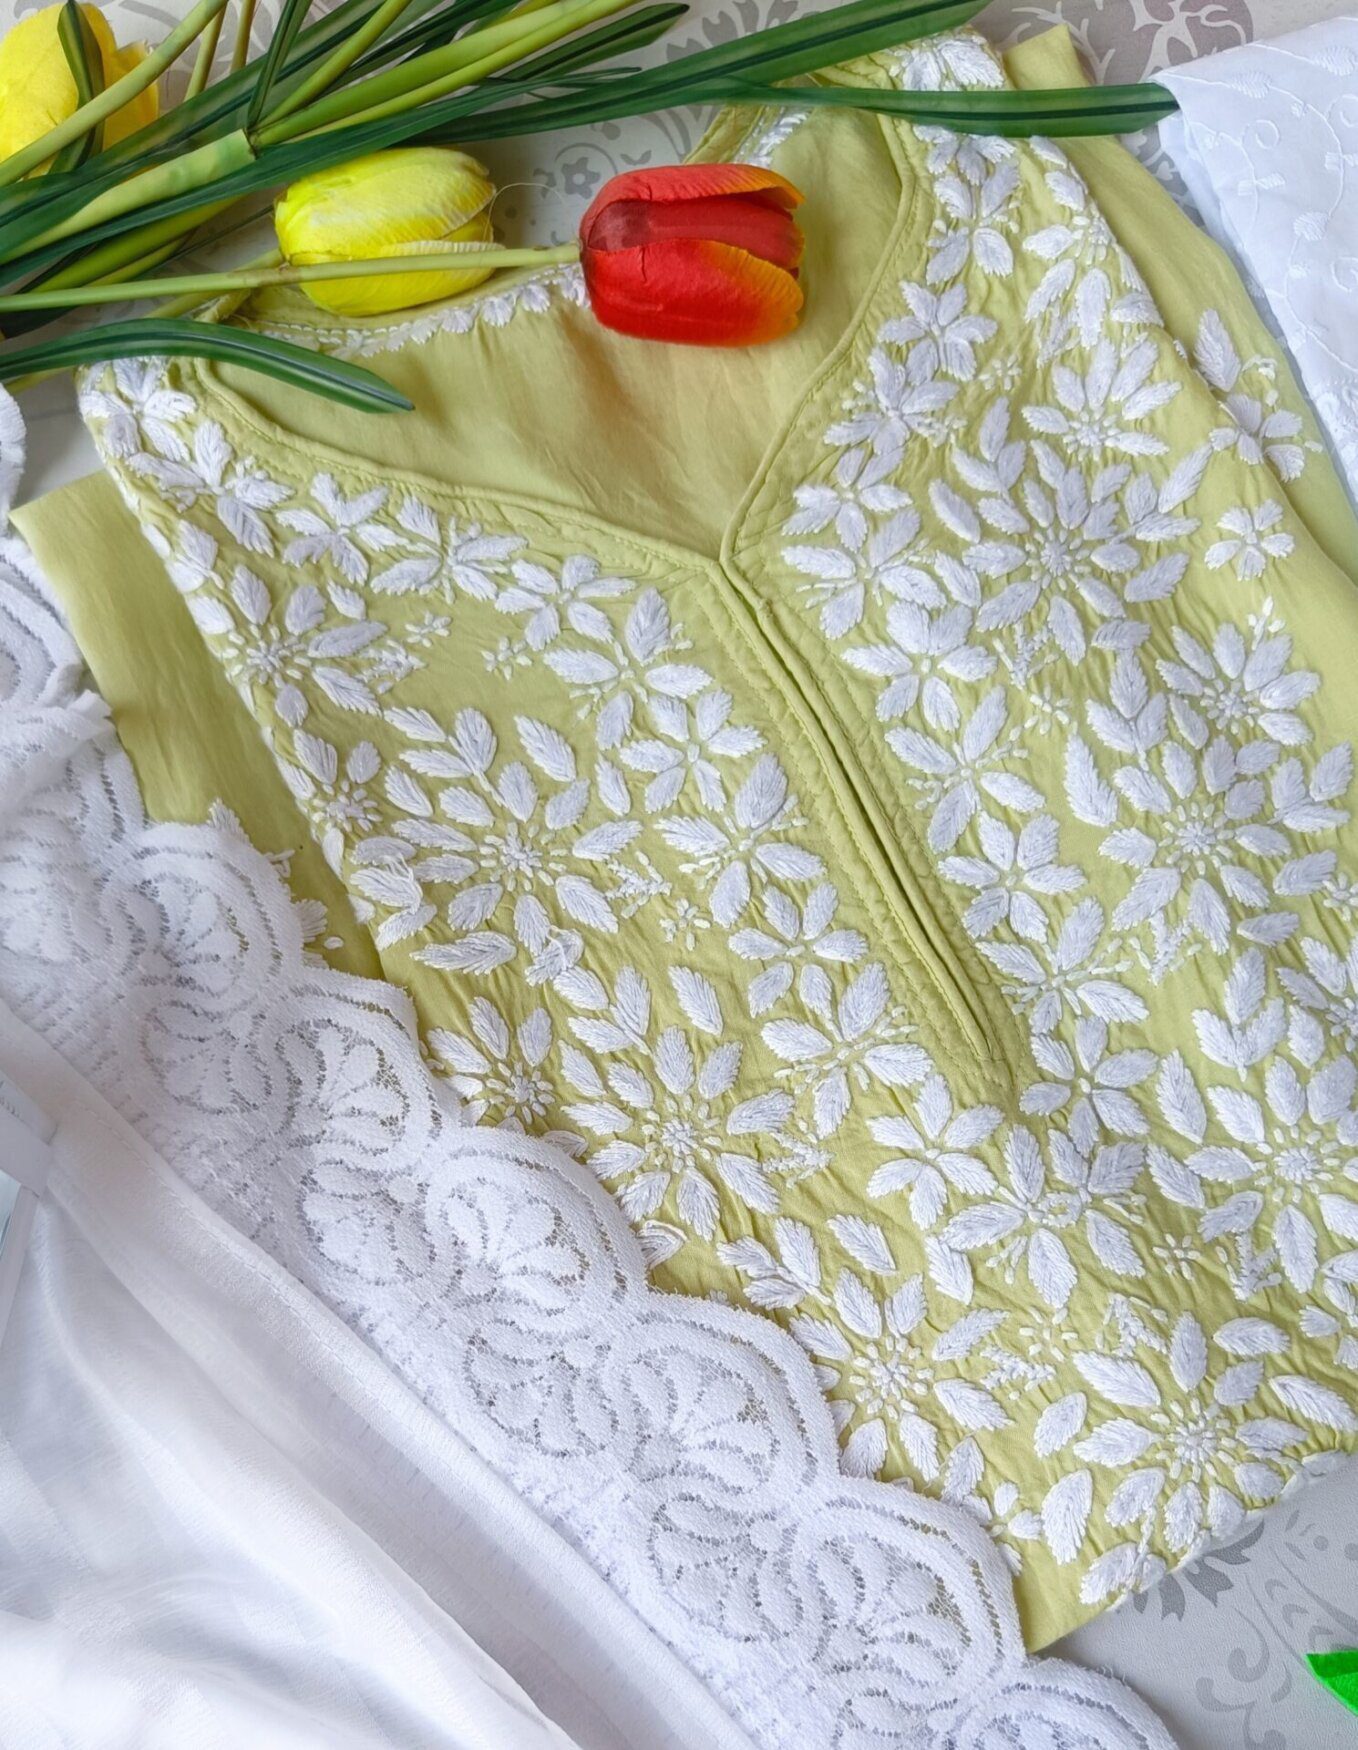 Graceful Lime Green Modal Chikankari Outfit